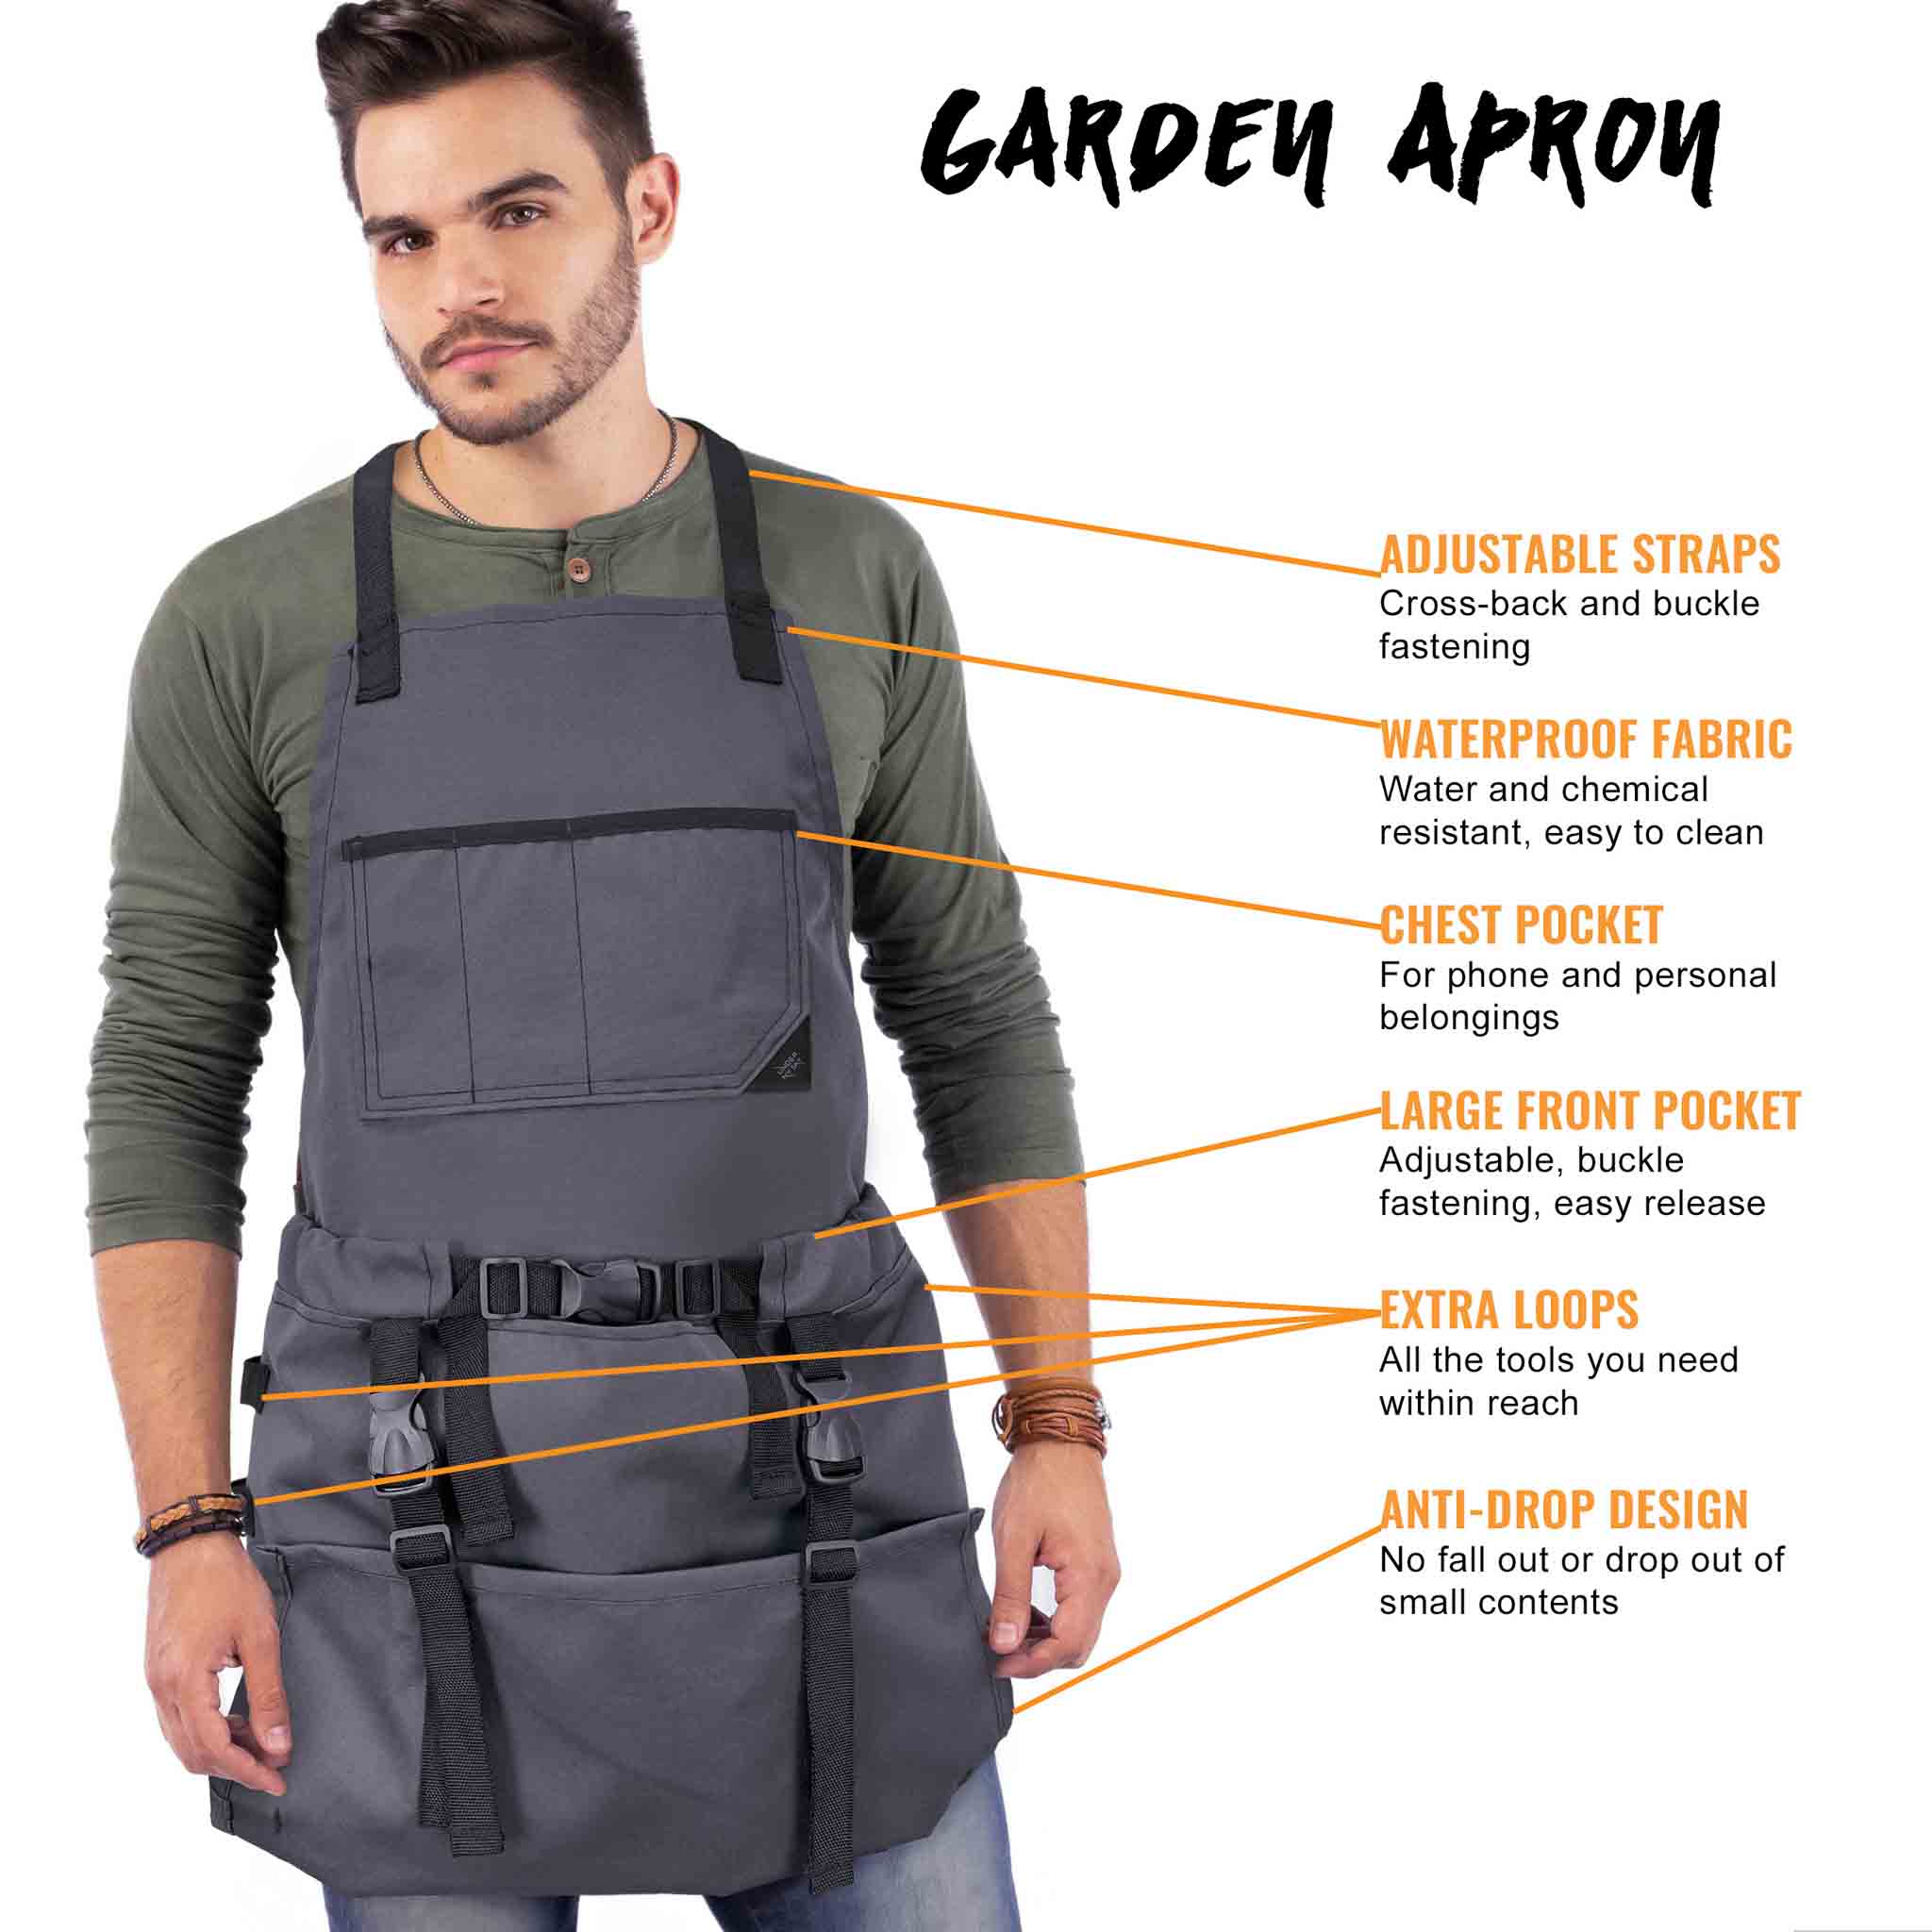 Gardening Apron – Harvest Pouch, Pockets, Loops, Cross-Back Straps